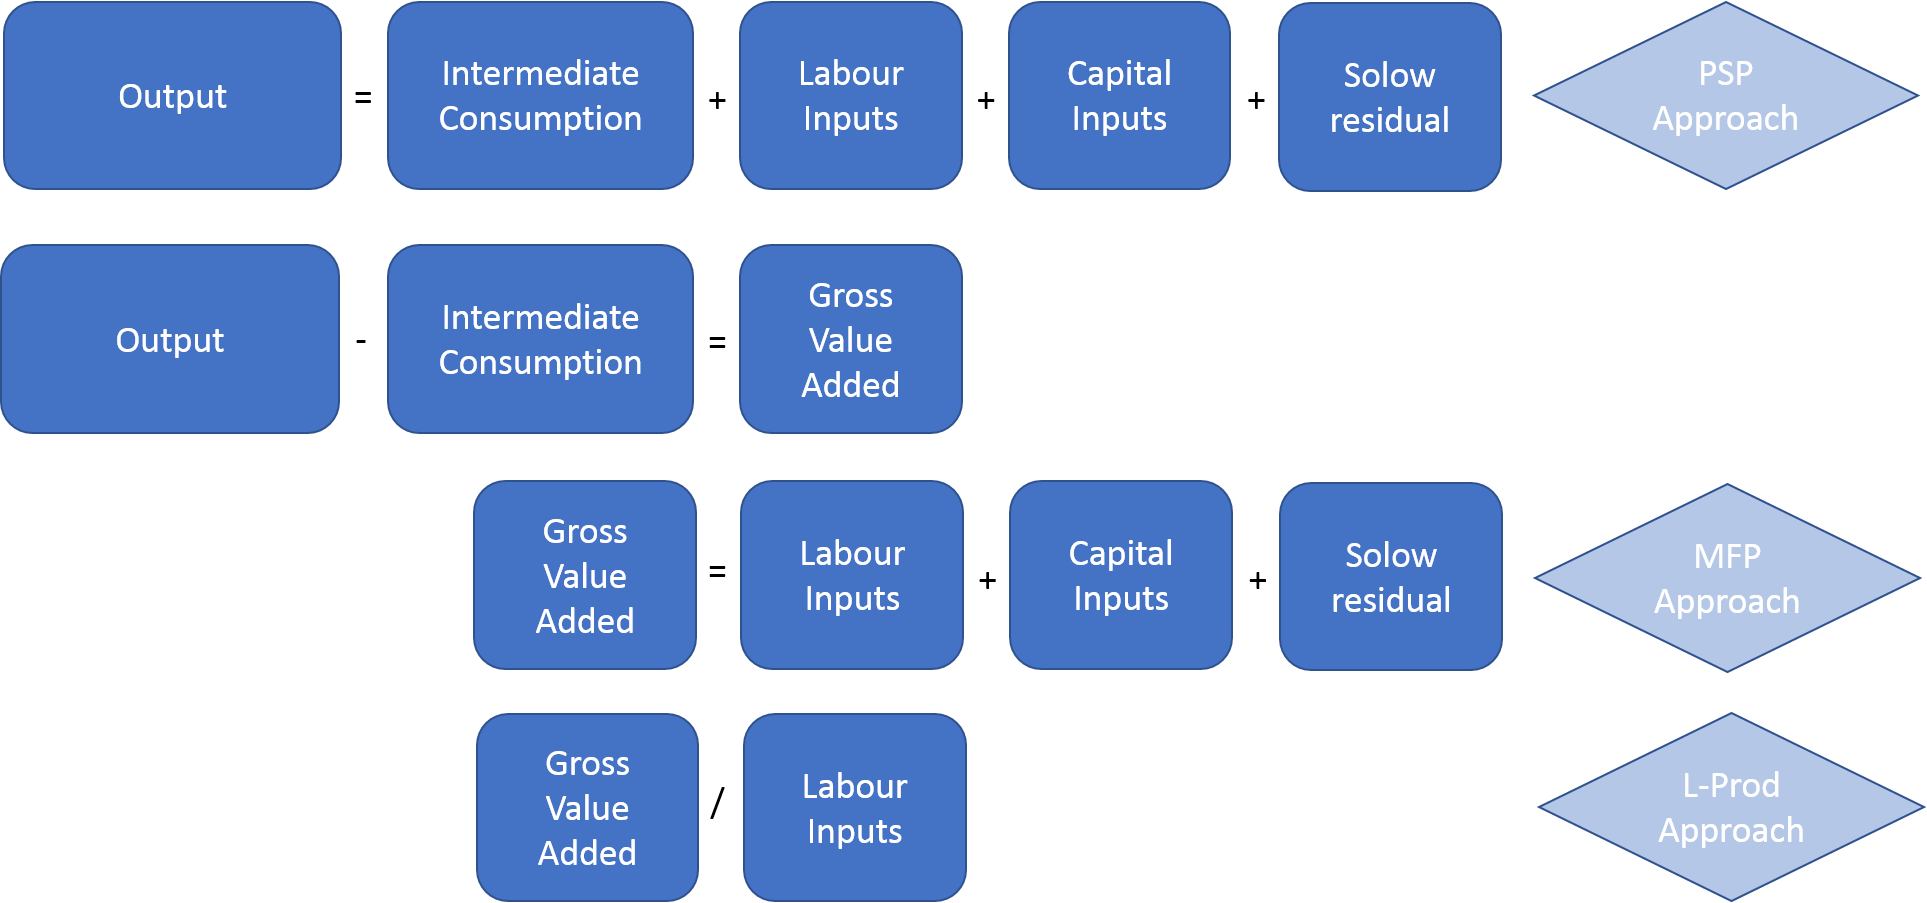 Shows how the three productivity measures are constructed in terms of their output and inputs factors